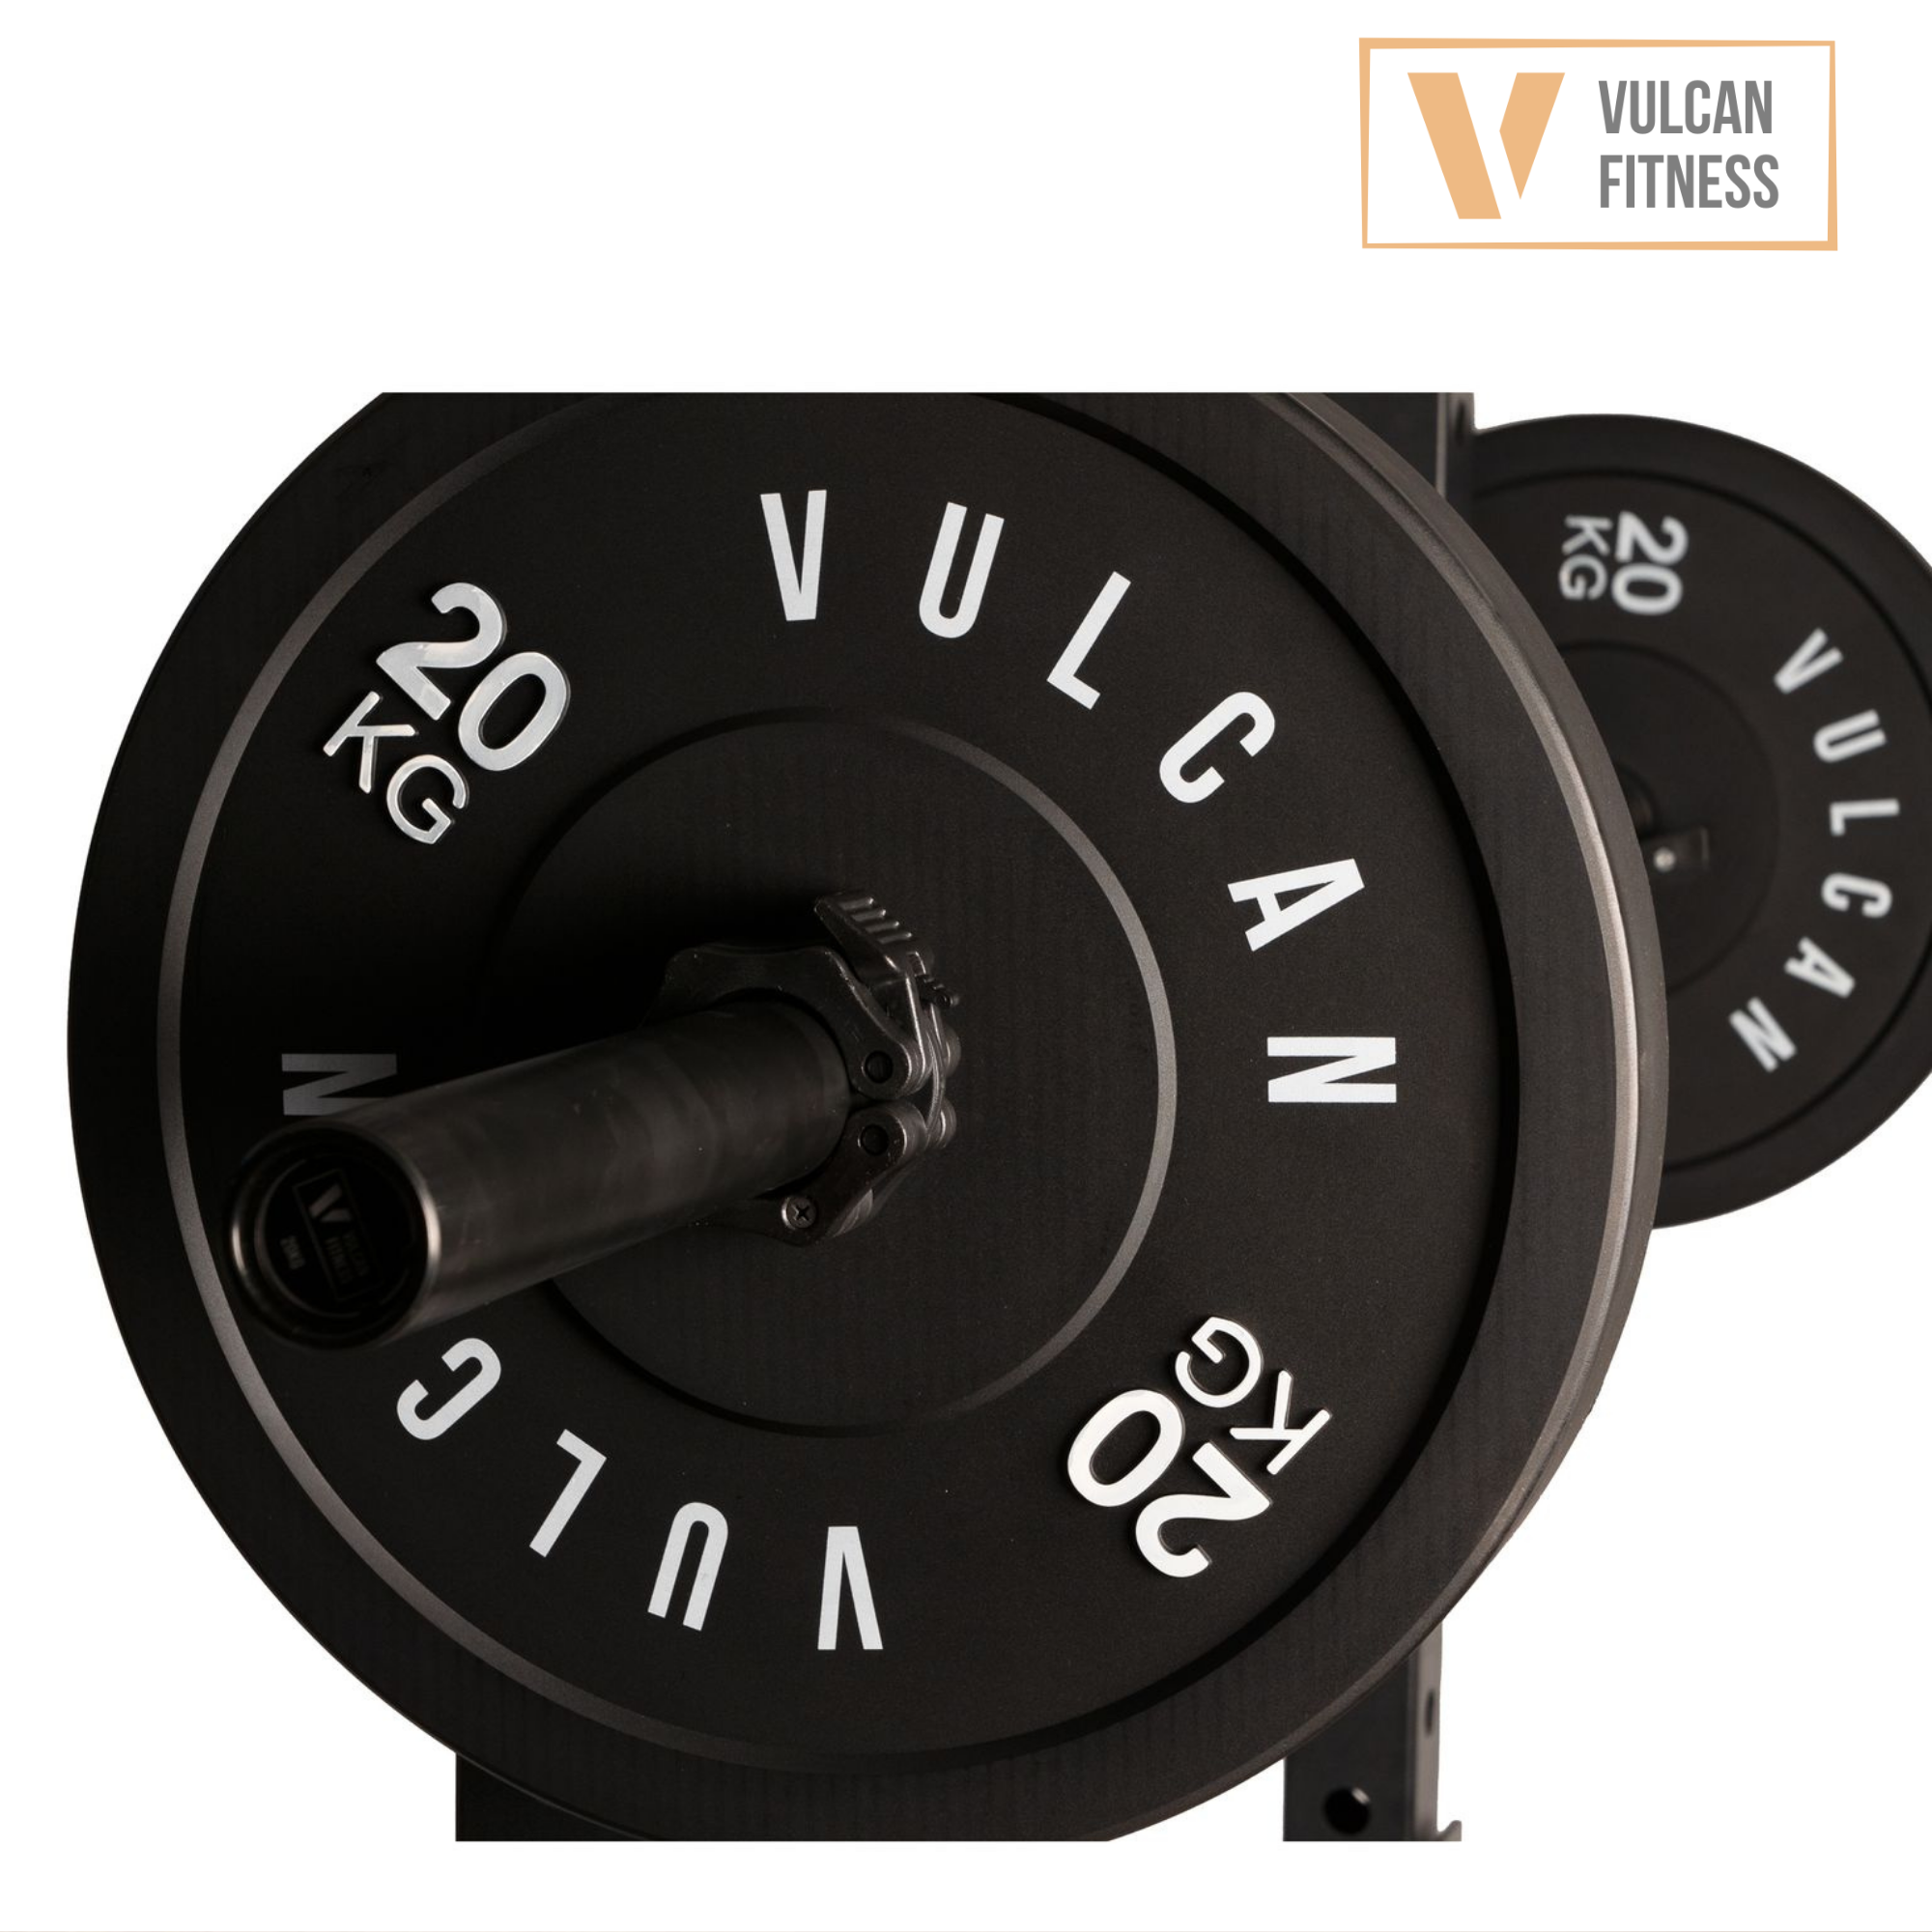 VULCAN Elite Squat Rack, Olympic Barbell, 150kg Black Bumper Weight Plates & Pro Adjustable Bench | IN STOCK